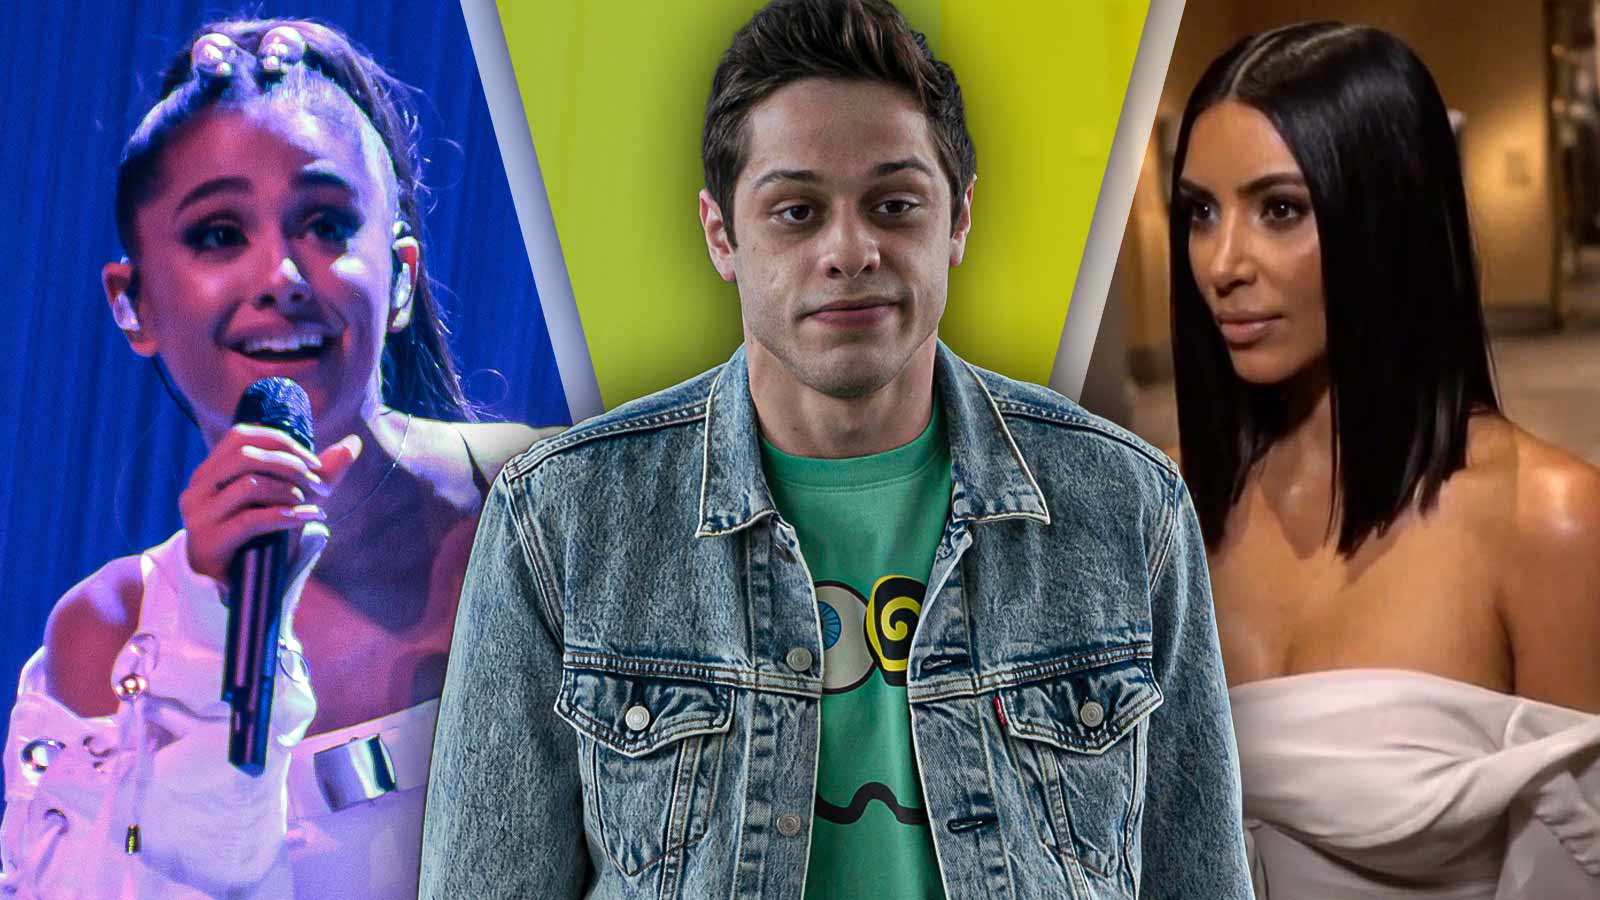 Pete Davidson’s Spicy Love Life: From Larry David’s Daughter to Ariana Grande and Kim Kardashian, Every High-profile Woman Comedian Has Dated